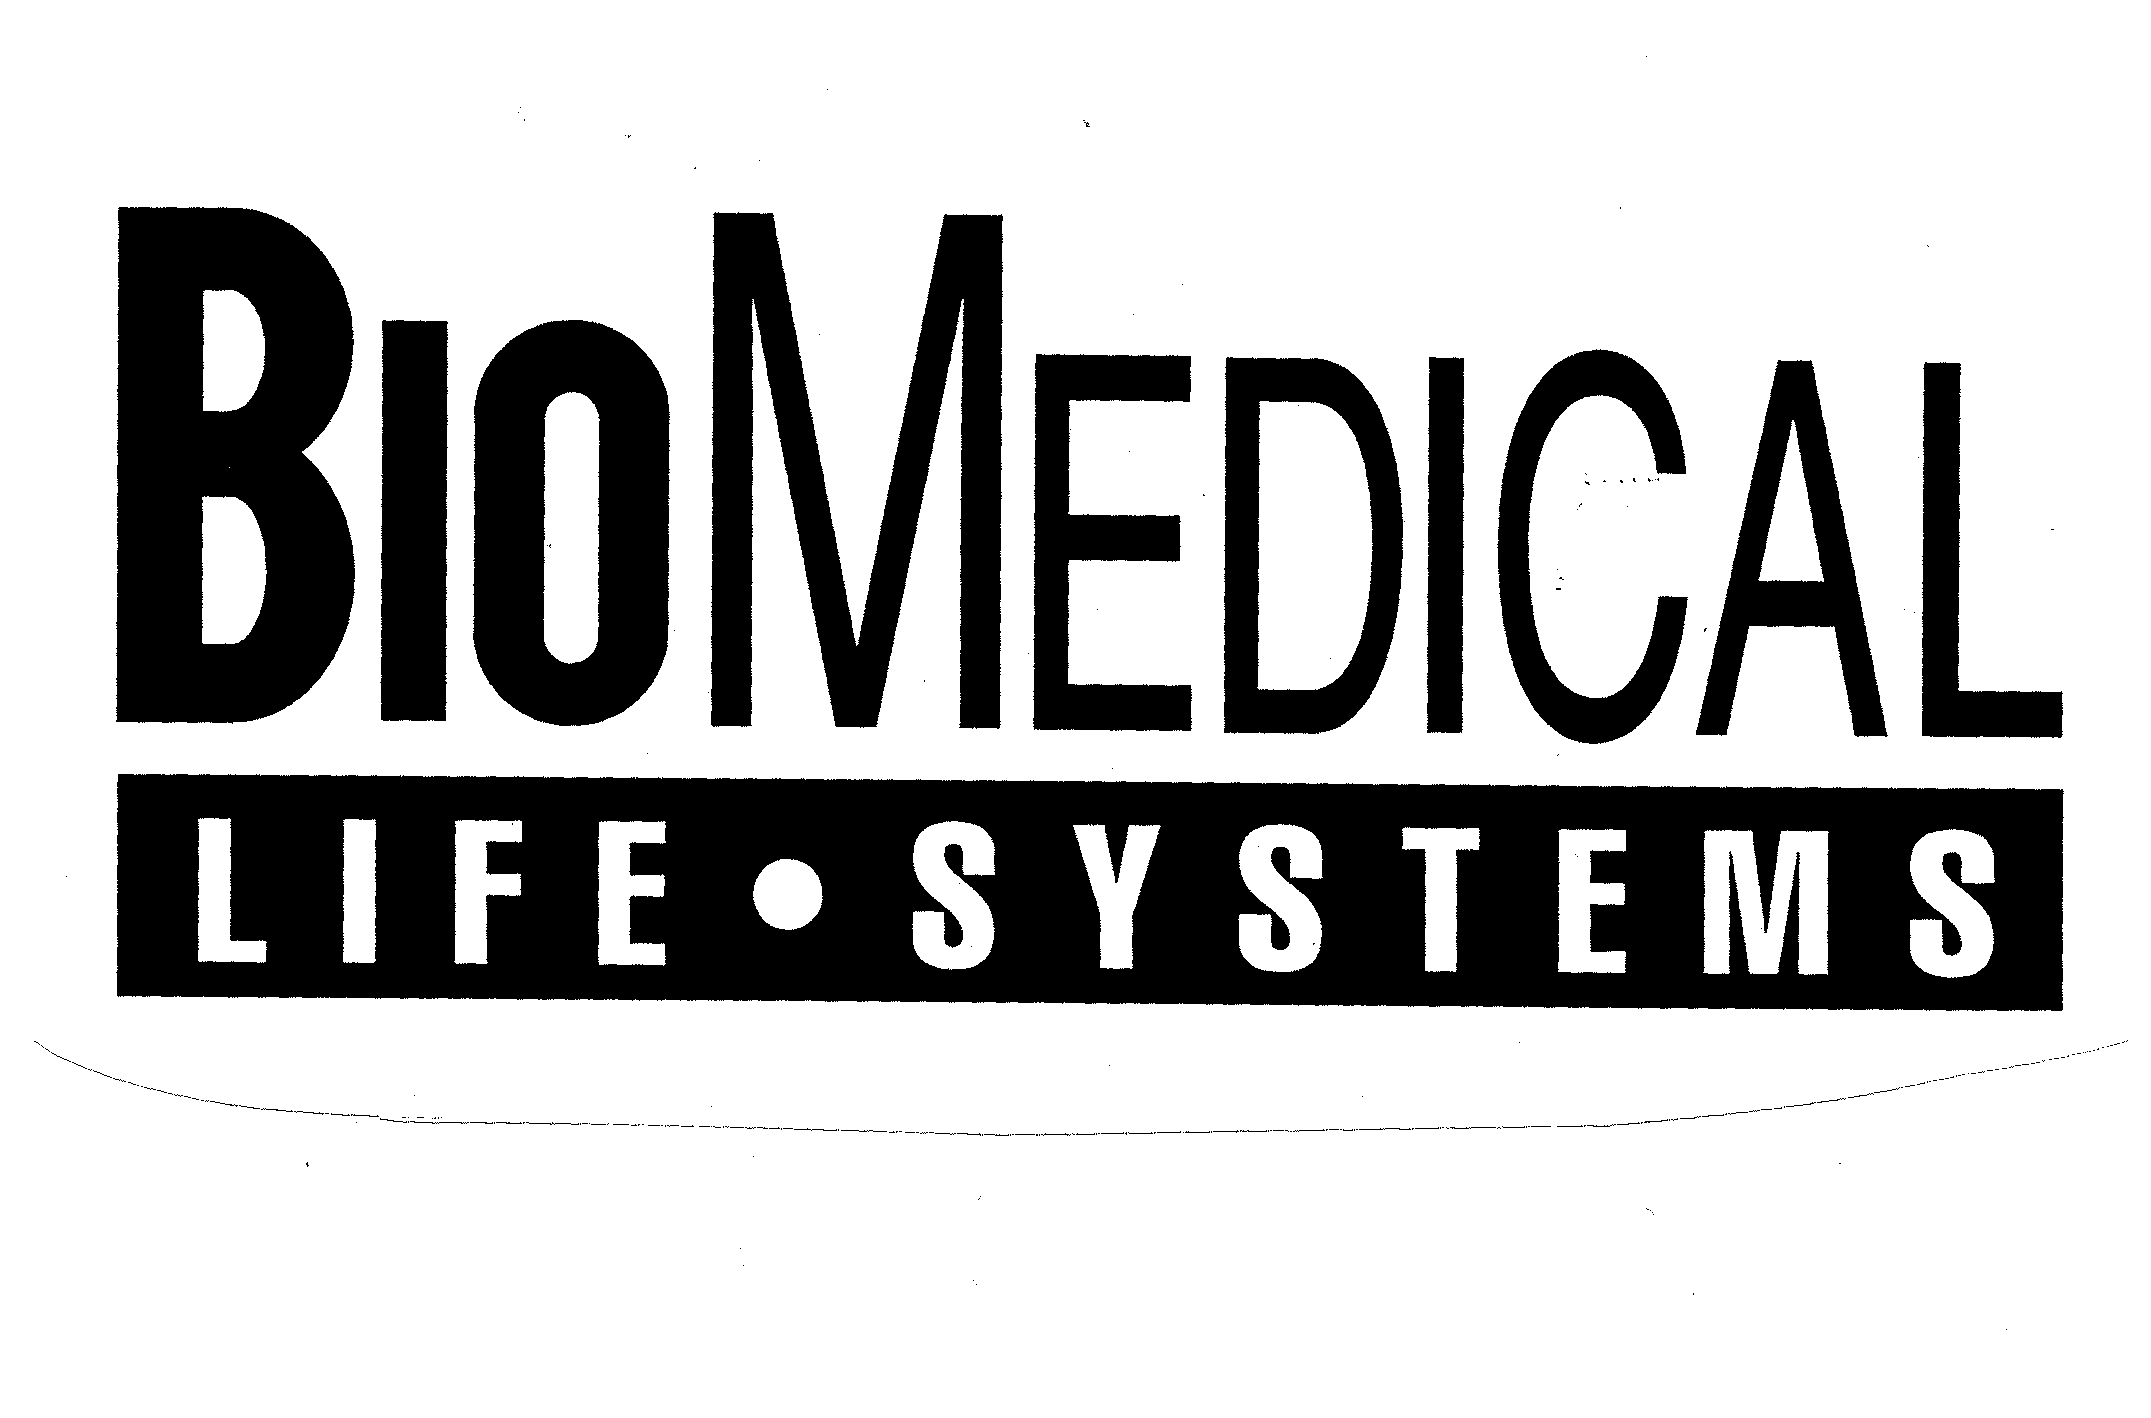  BIOMEDICAL LIFE SYSTEMS